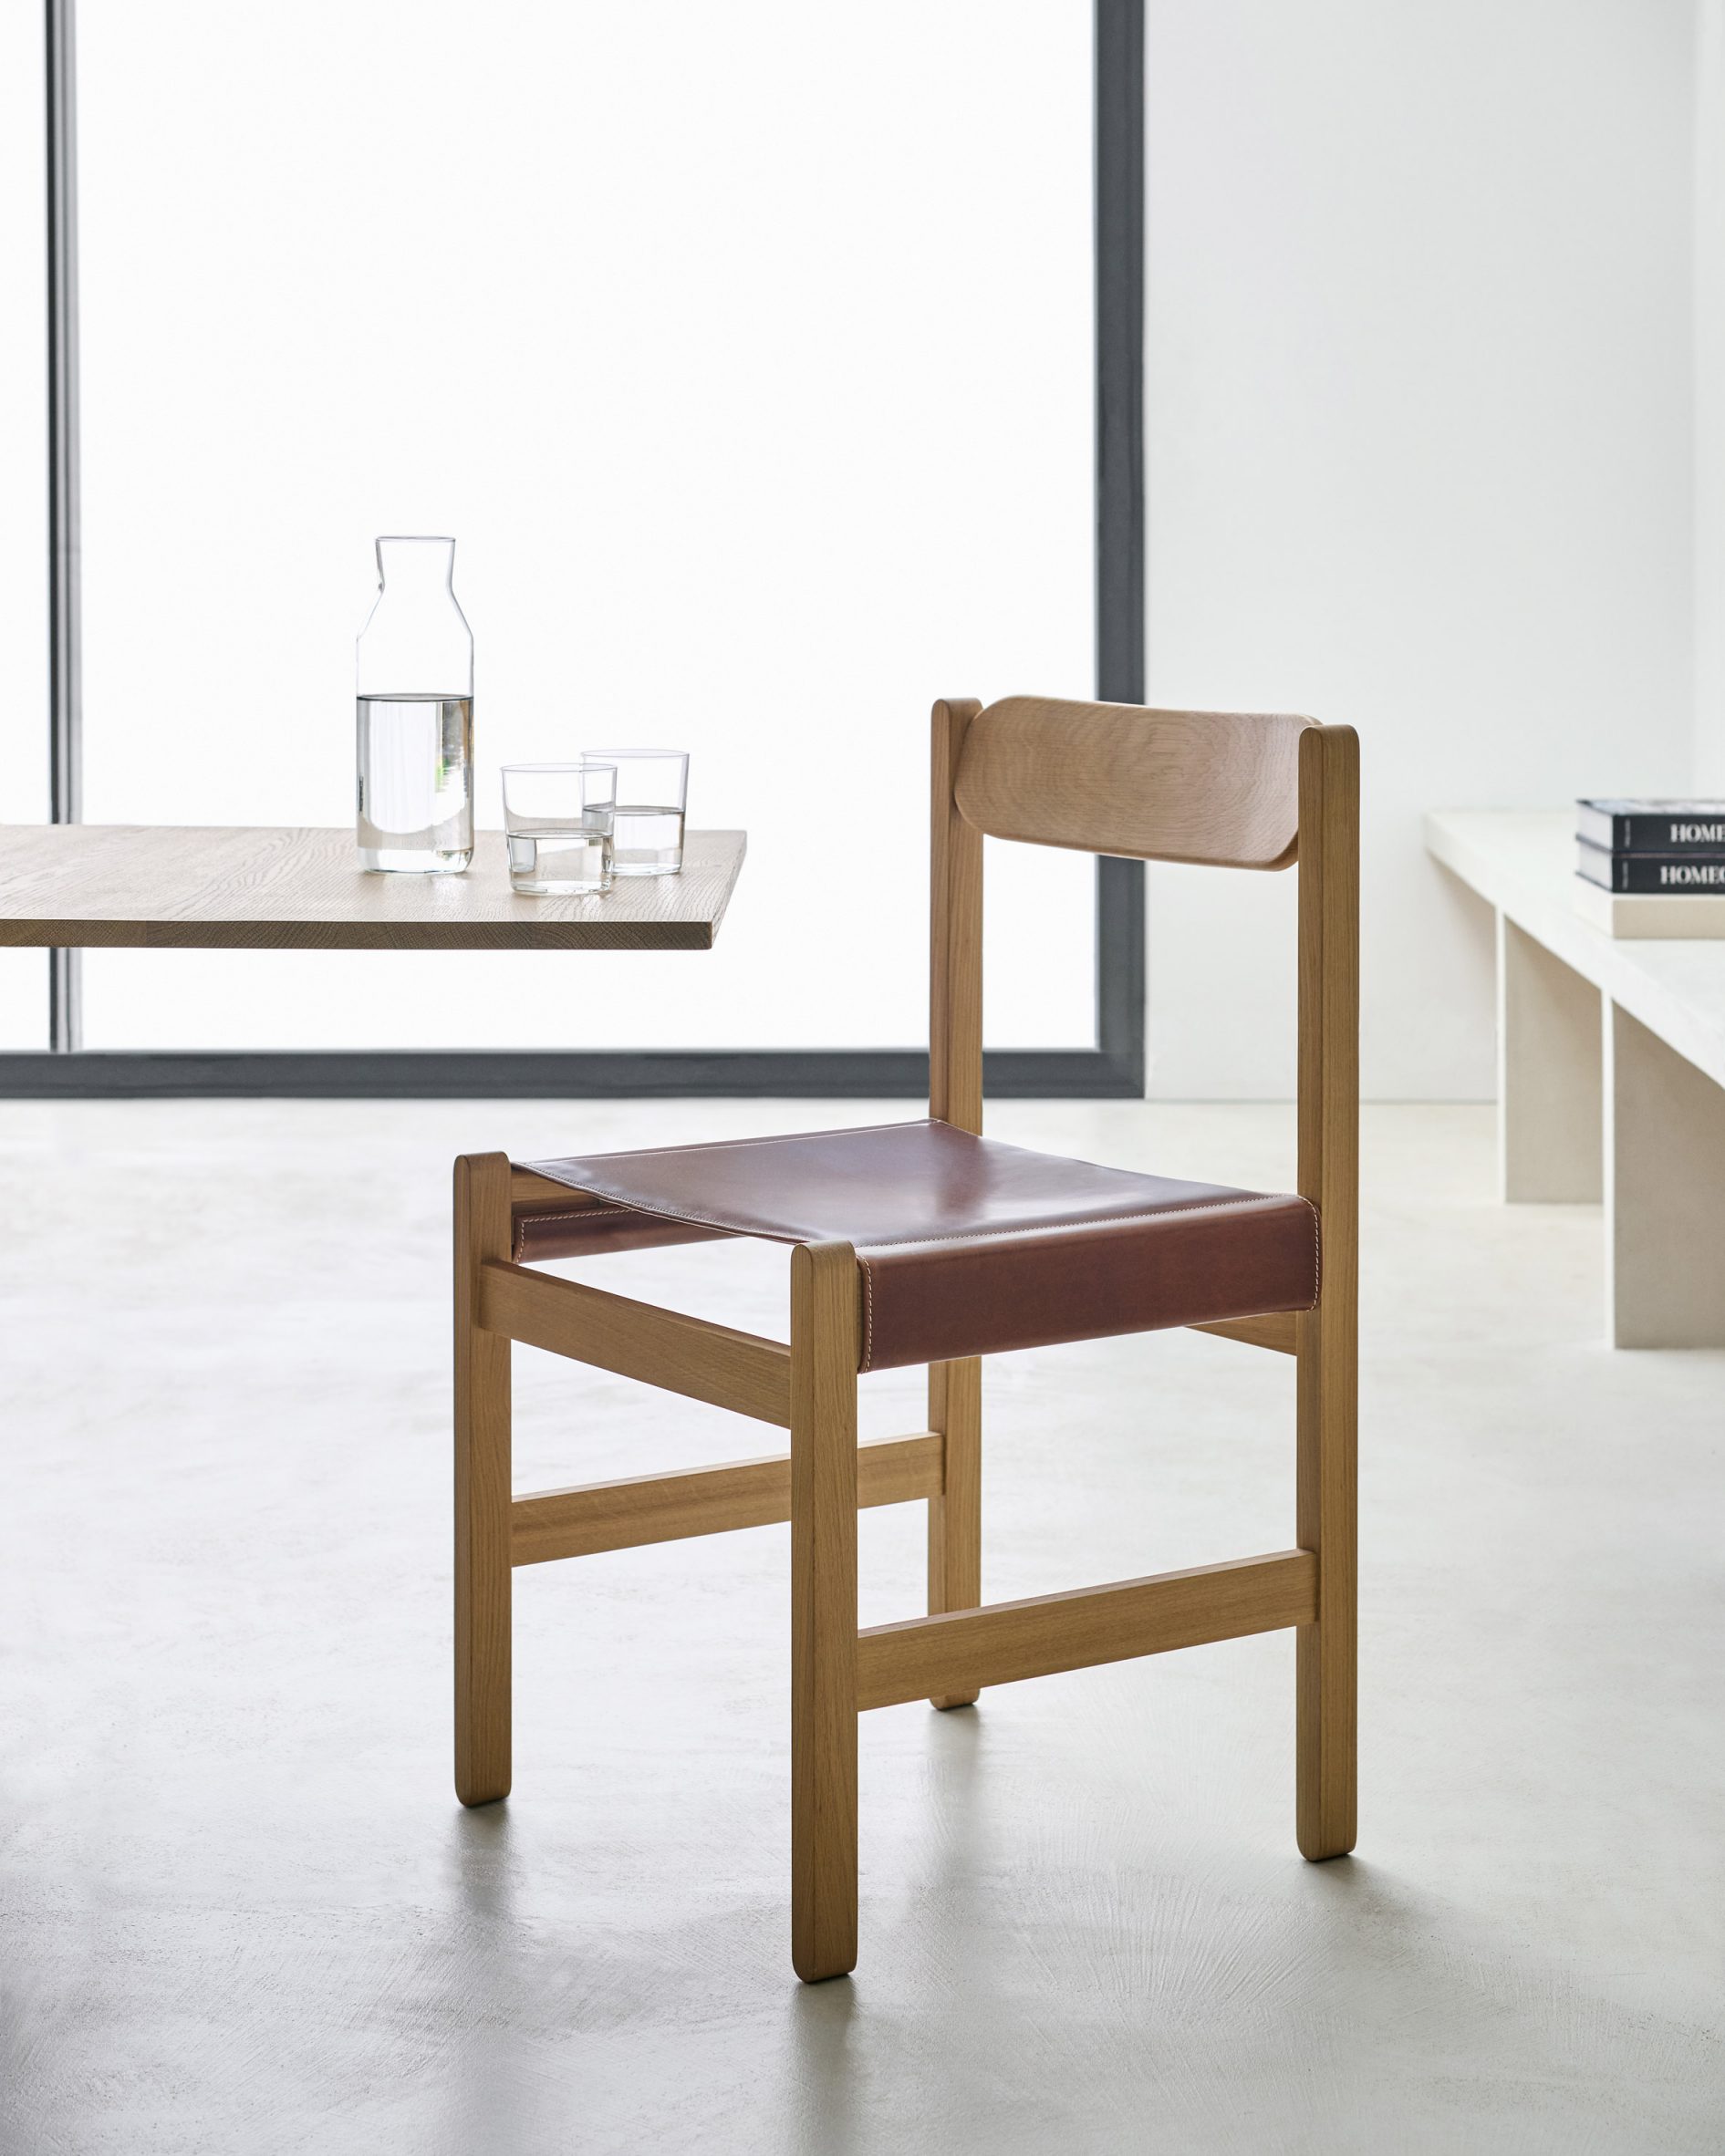 The Highgate Chair features a leather seat that can be re-tensioned as required